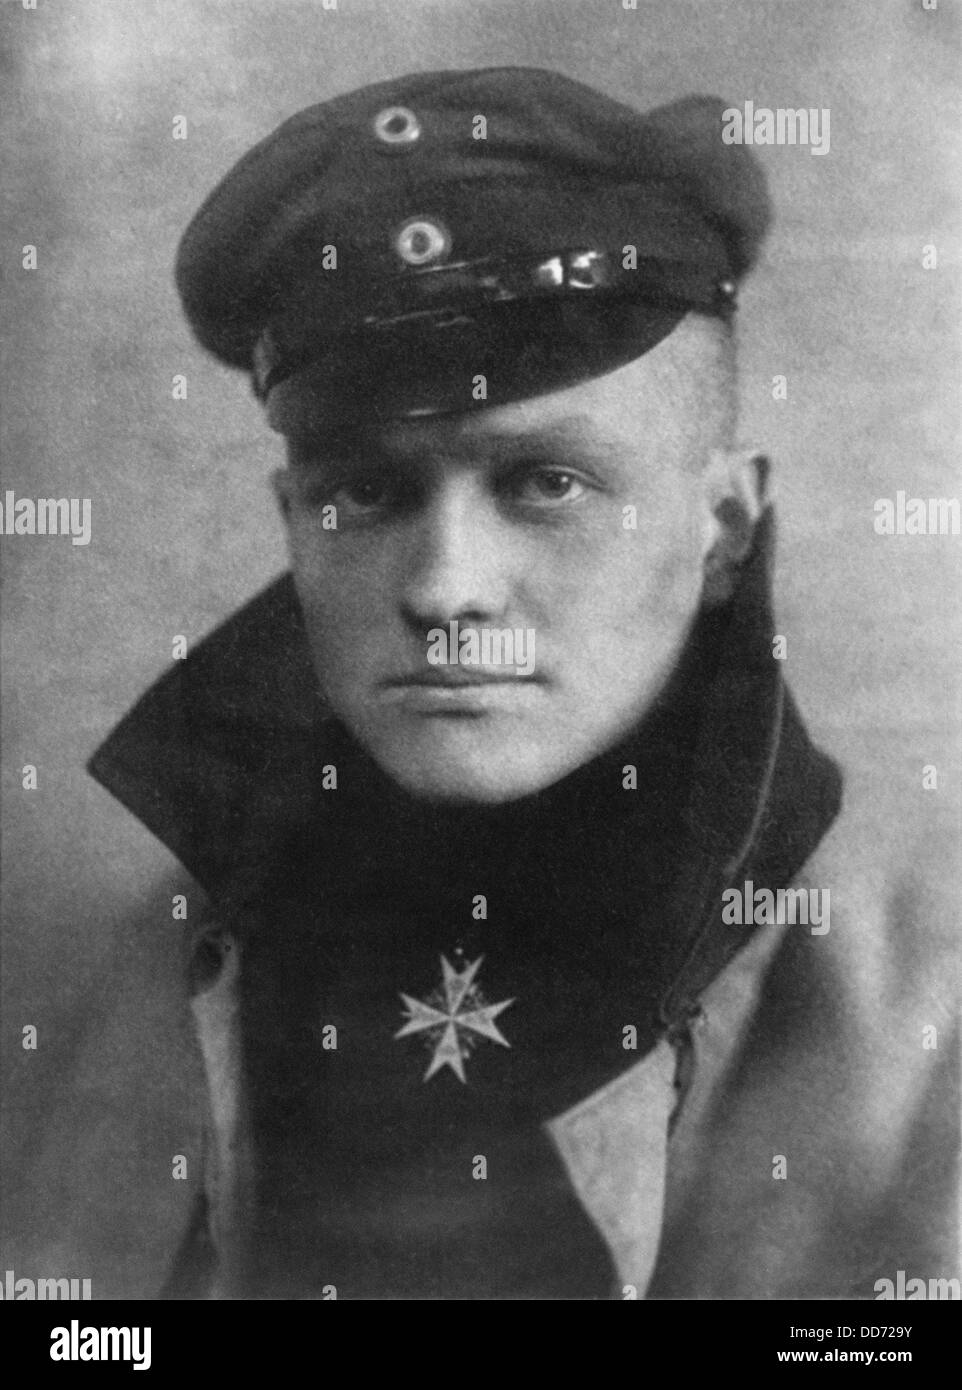 Baron Captain Manfred von Richtofen, the Red Baron, was a German fighter pilot. He was the top ace of World War I, officially Stock Photo